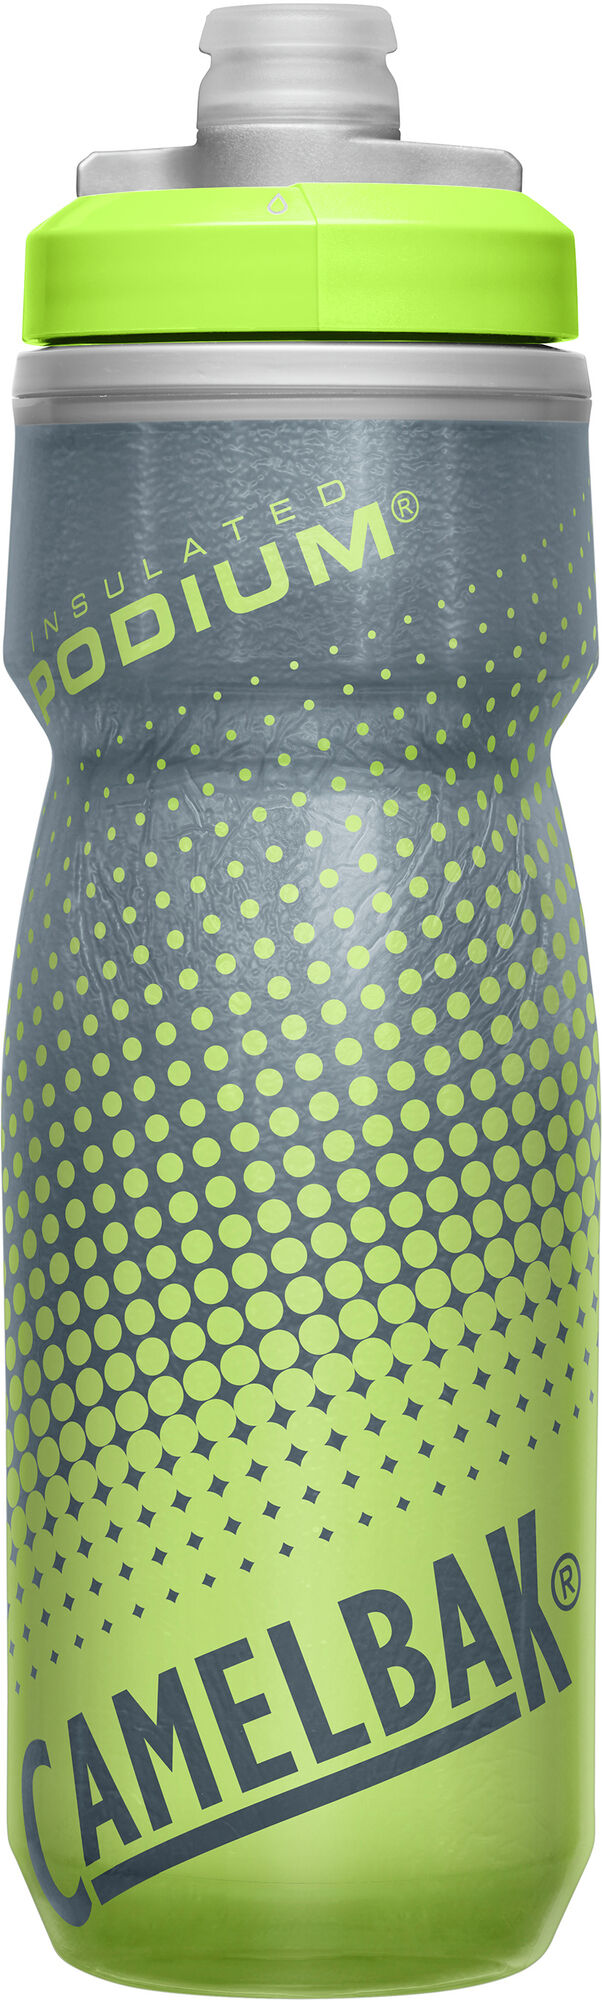 Camelbak Podium Chill Insulated Water Bottle (Reflective Ghost) (24oz)